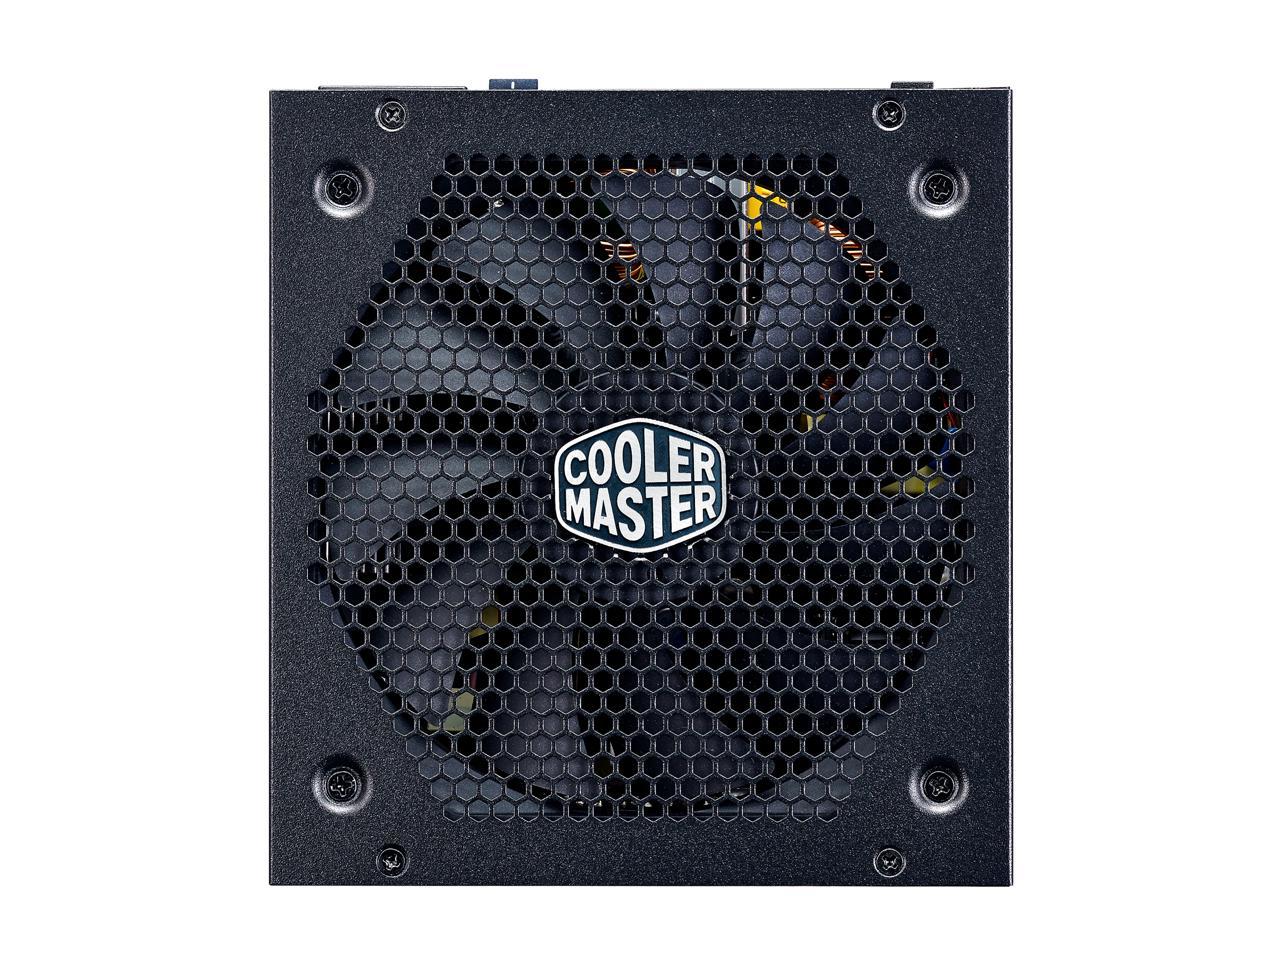 Cooler Master V550 Gold V2 Full Modular, 550W, 80+ Gold Efficiency, Semi-fanless Operation, 16AWG PCIe High-efficiency Cables, 10 Year Warranty